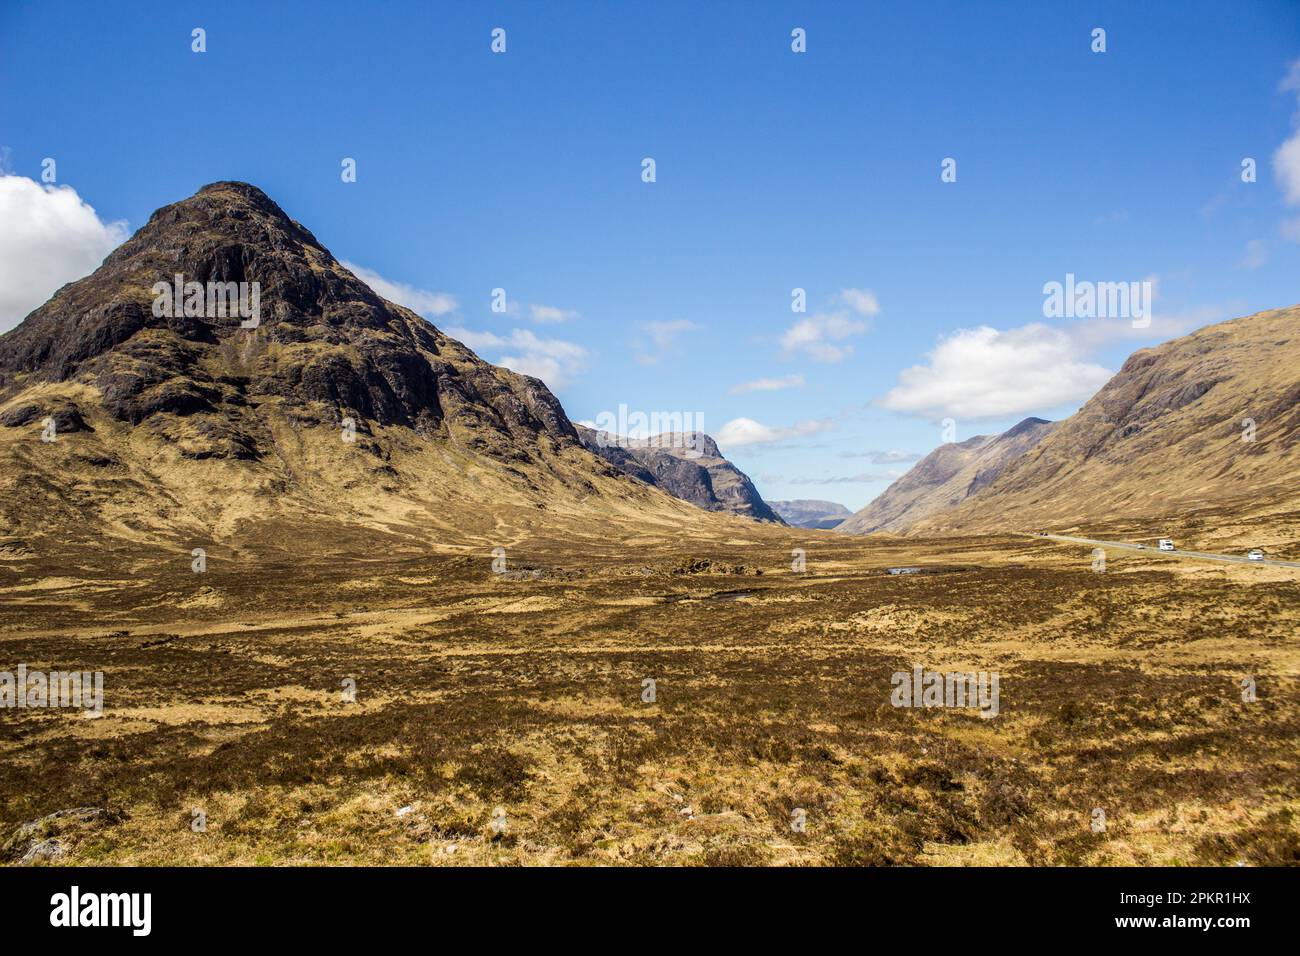 Buchaille Etive Mor, a iconic Scottish Highlands mountain rising from the surrounding heathland Stock Photo